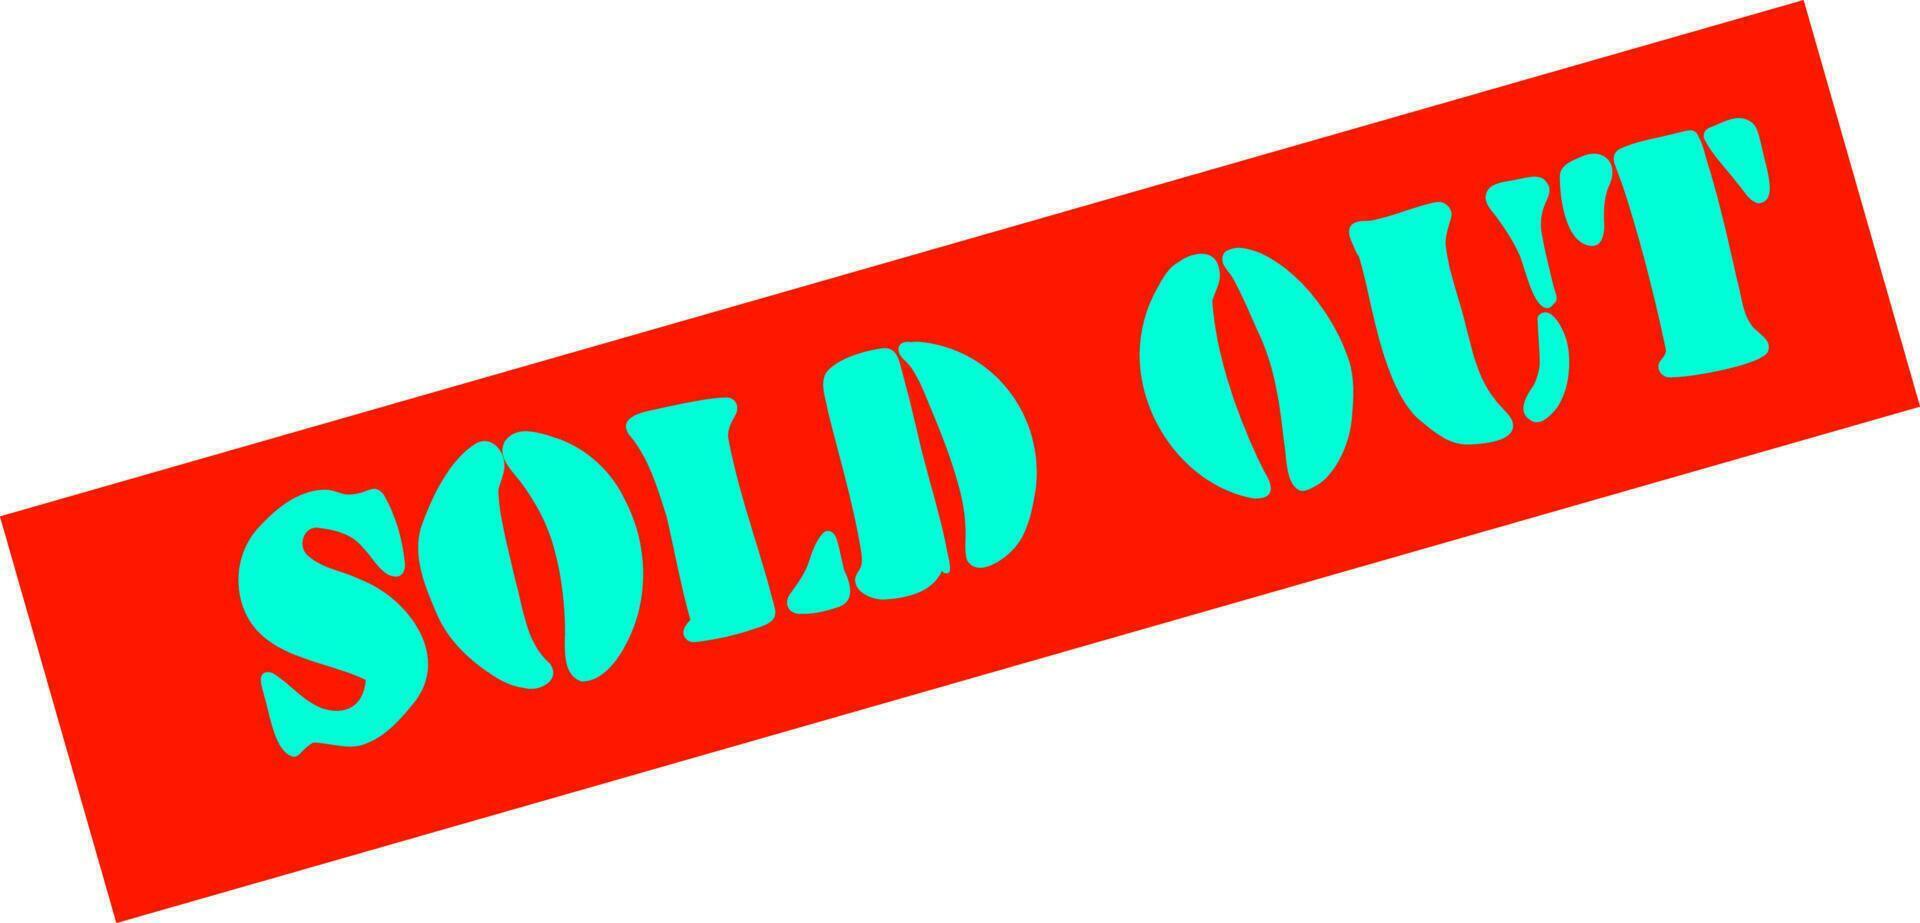 Sold Out sign vector